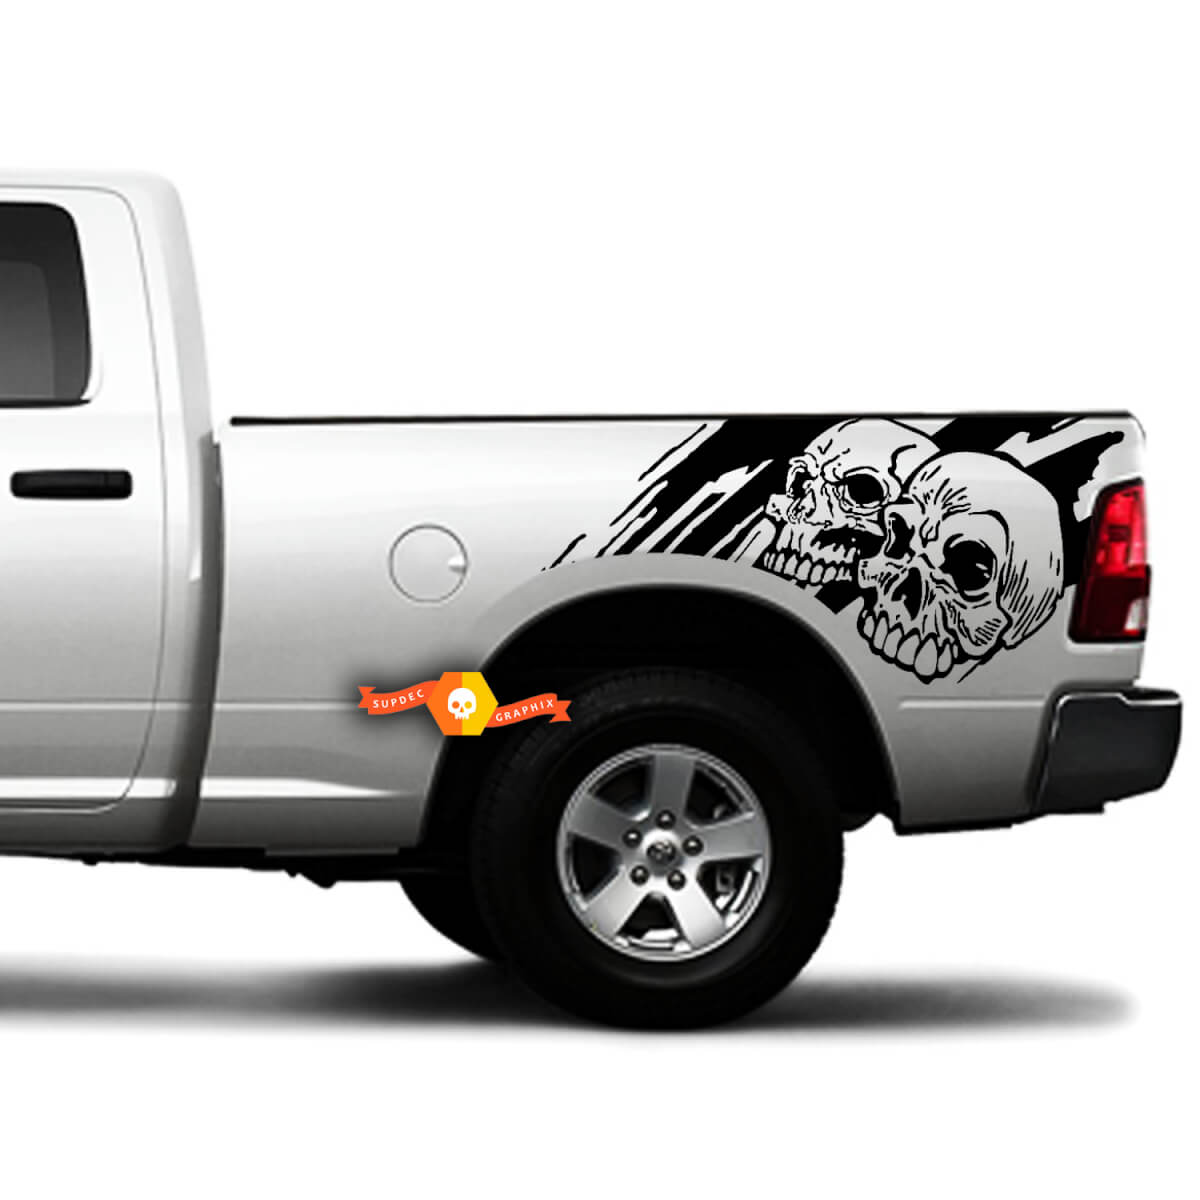 2 Side Skull Distressed Grunge Design Car Side Bed Pickup Vehicle Truck Vinyl Graphic Decal Tailgate
